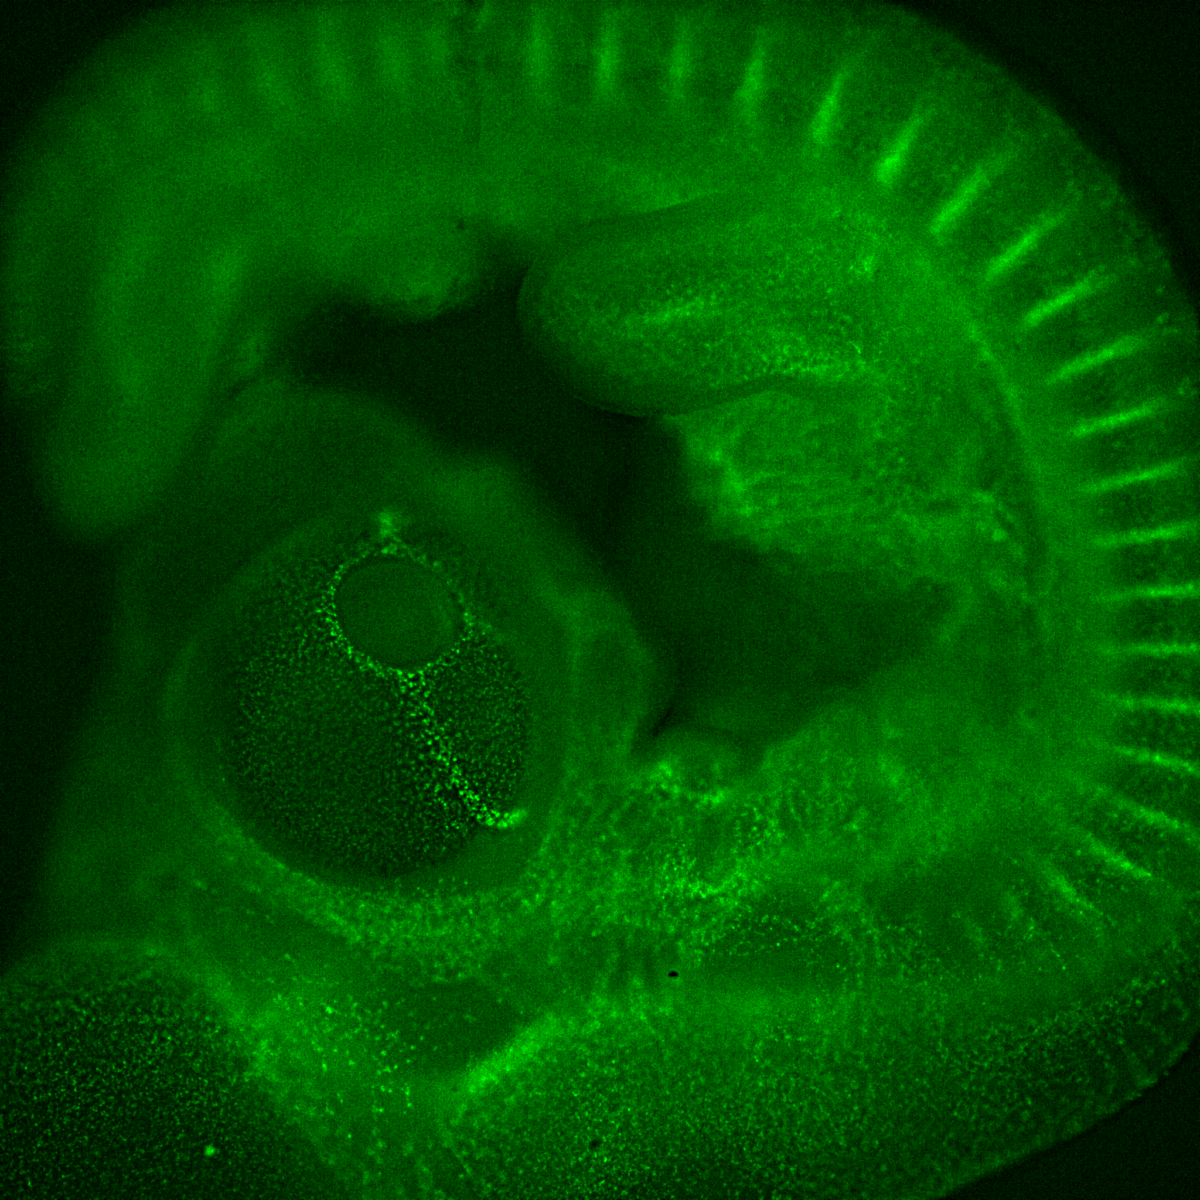 This transgenic quail is from Dr. Peter Lwigale's lab, it is expressing fluorescence (GFP) to target vasculature, which you can see quite well around the eye at this stage. Imaged on a Leica Micro Thunder during 2021 Embryology Course. Credit: Evan Curcio